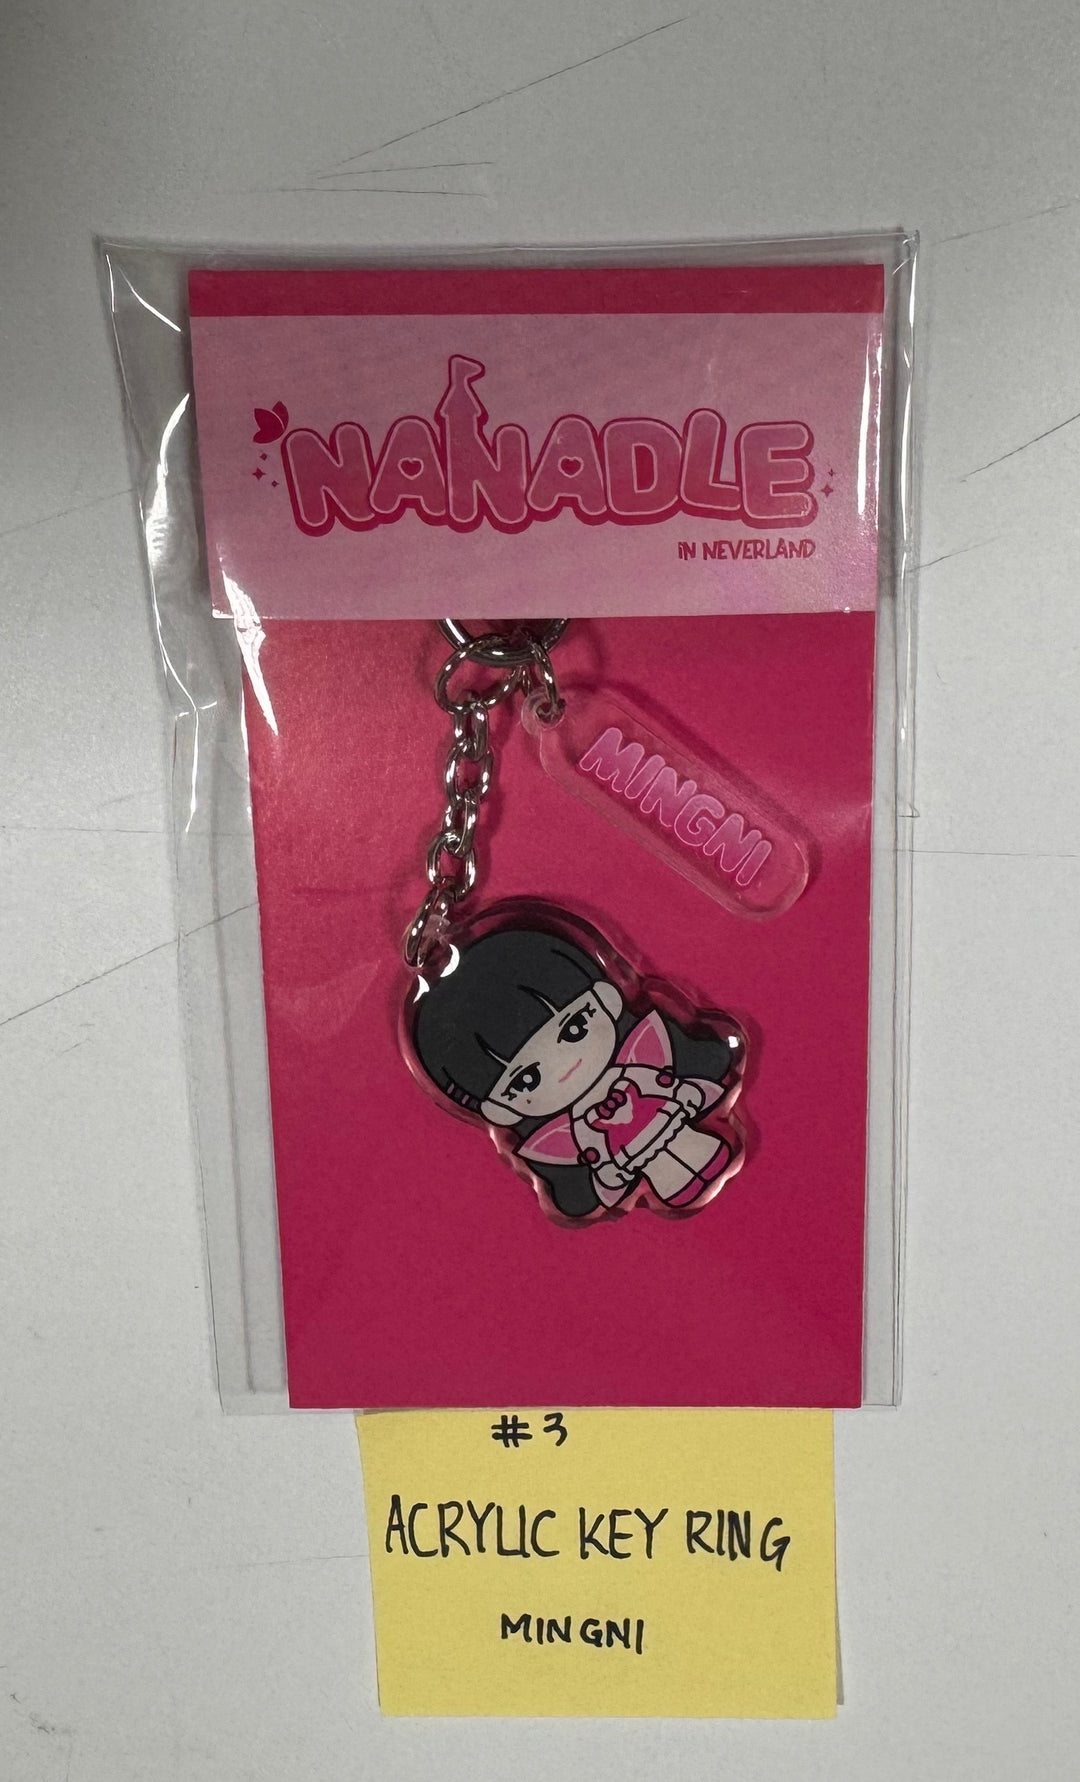 (g) I-DLE "NANADLE IN NEVERLAND" - Soundwave Pop-Up MD [Hand Mirror, Mini Pouch Patch Set, Acrylic Keyring, Photocard Acrylic Stand] [24.5.2] (Restocked 6/4)